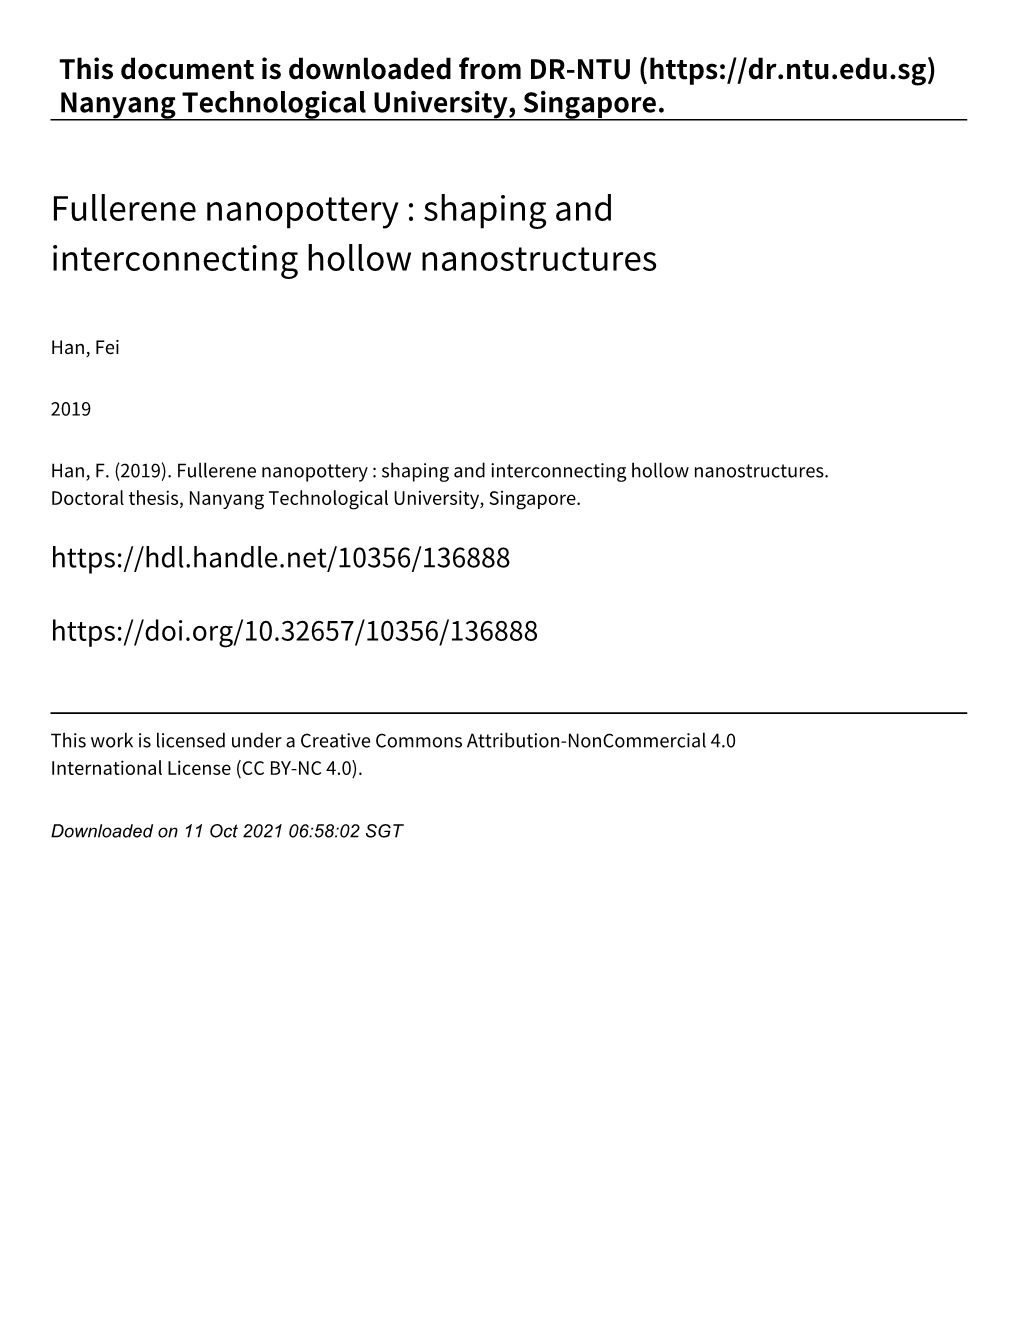 Fullerene Nanopottery : Shaping and Interconnecting Hollow Nanostructures